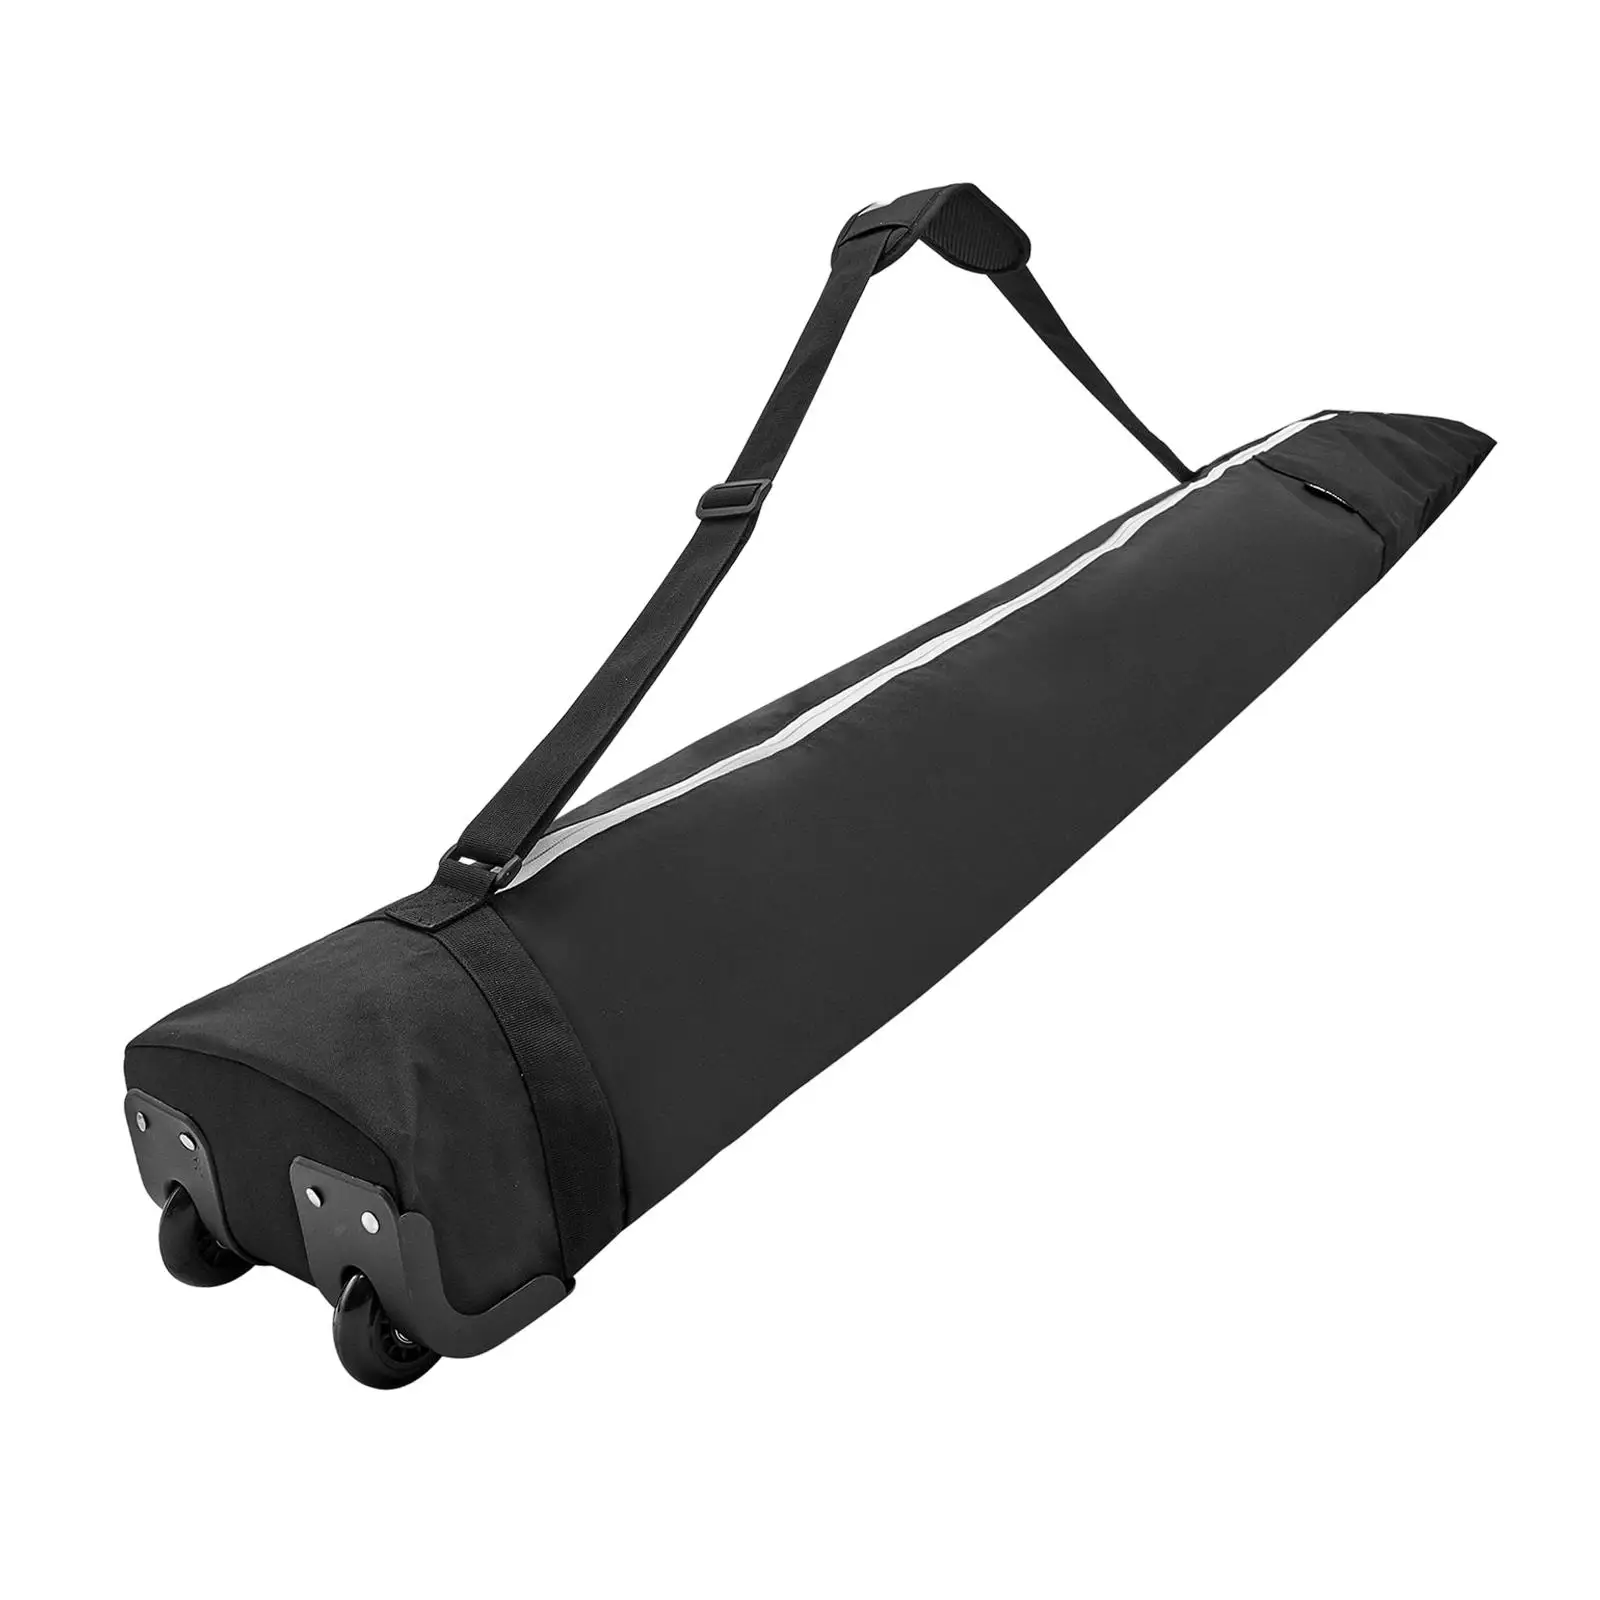 Rolling Snowboard Bag Extendable with Wheels for Air Travel Waterproof Transport Wrap Protection Sleeve for Snowboard Ski Gifts